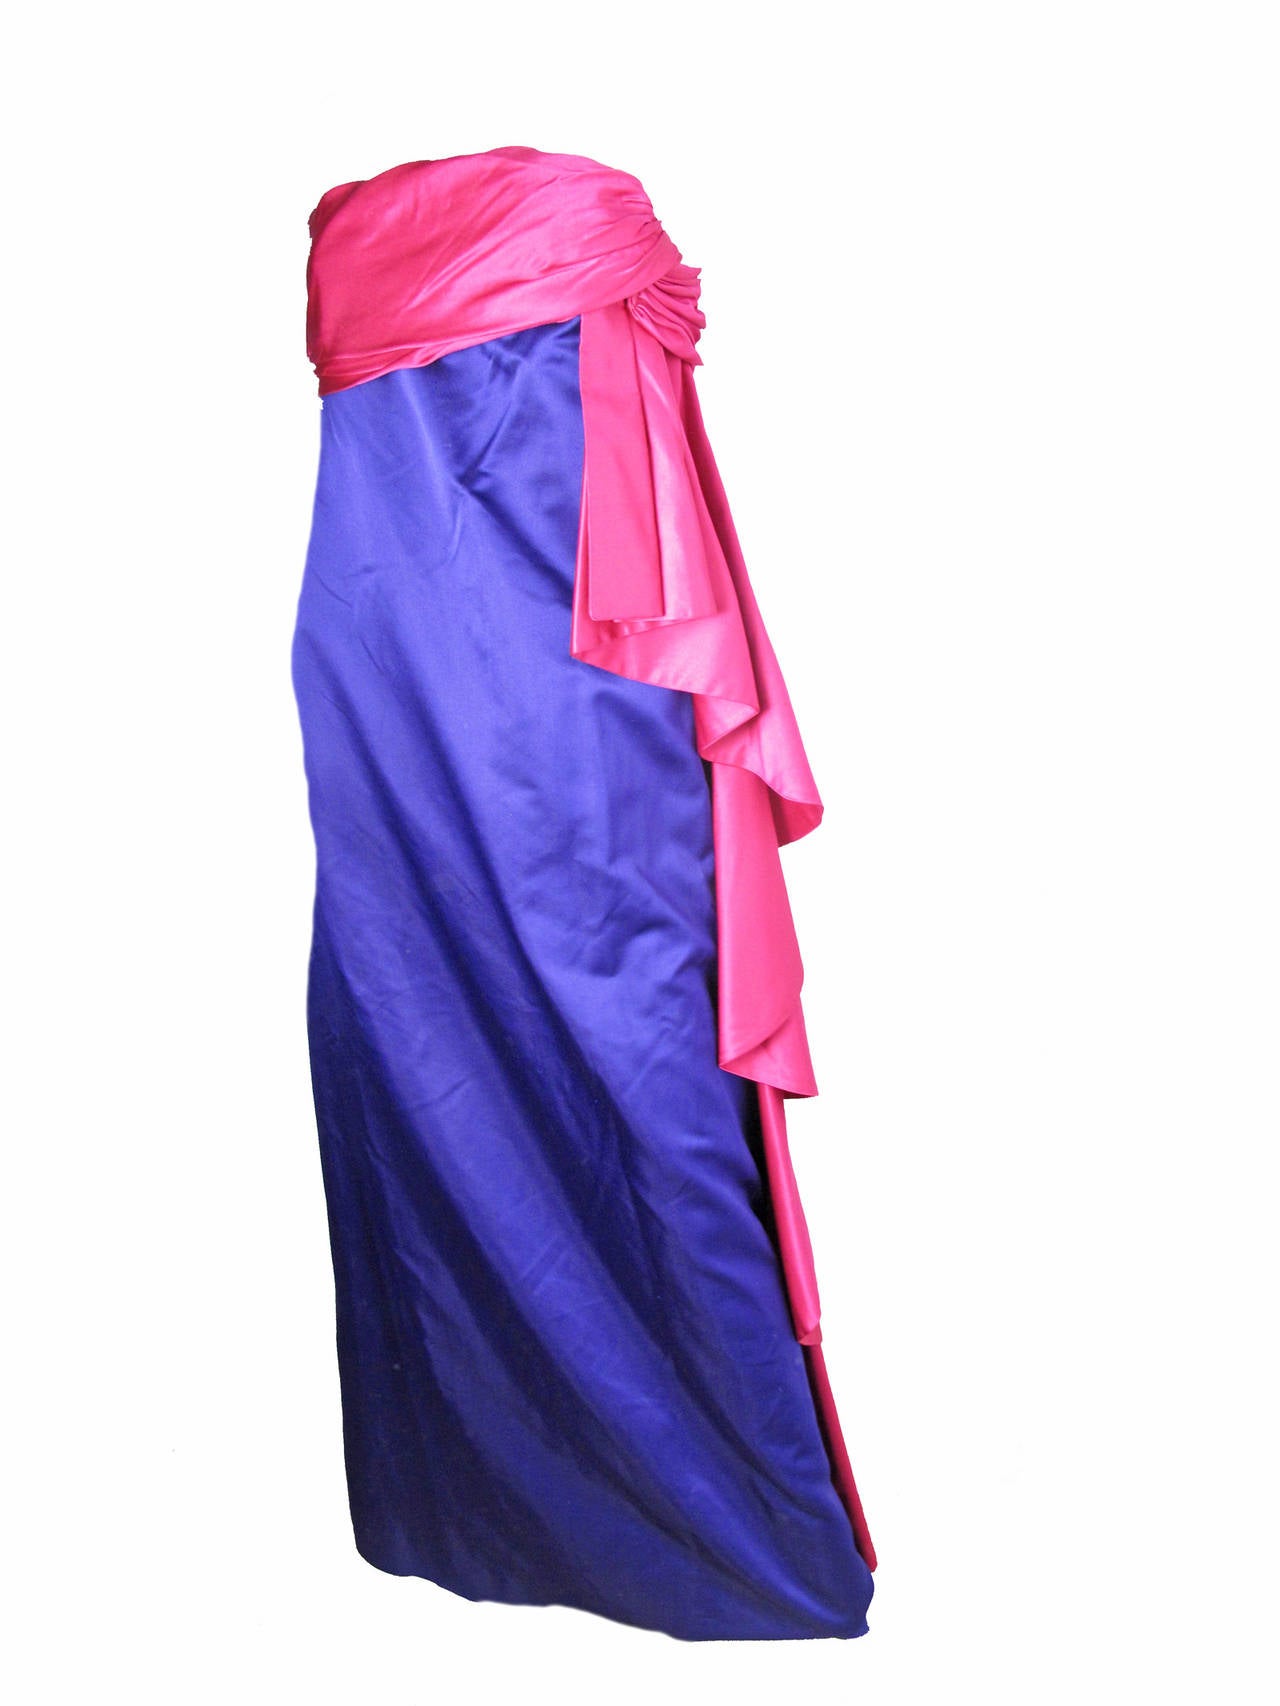 Gorgeous 1970s Bill Blass purple silk satin gown with pink ruffle on side. 34